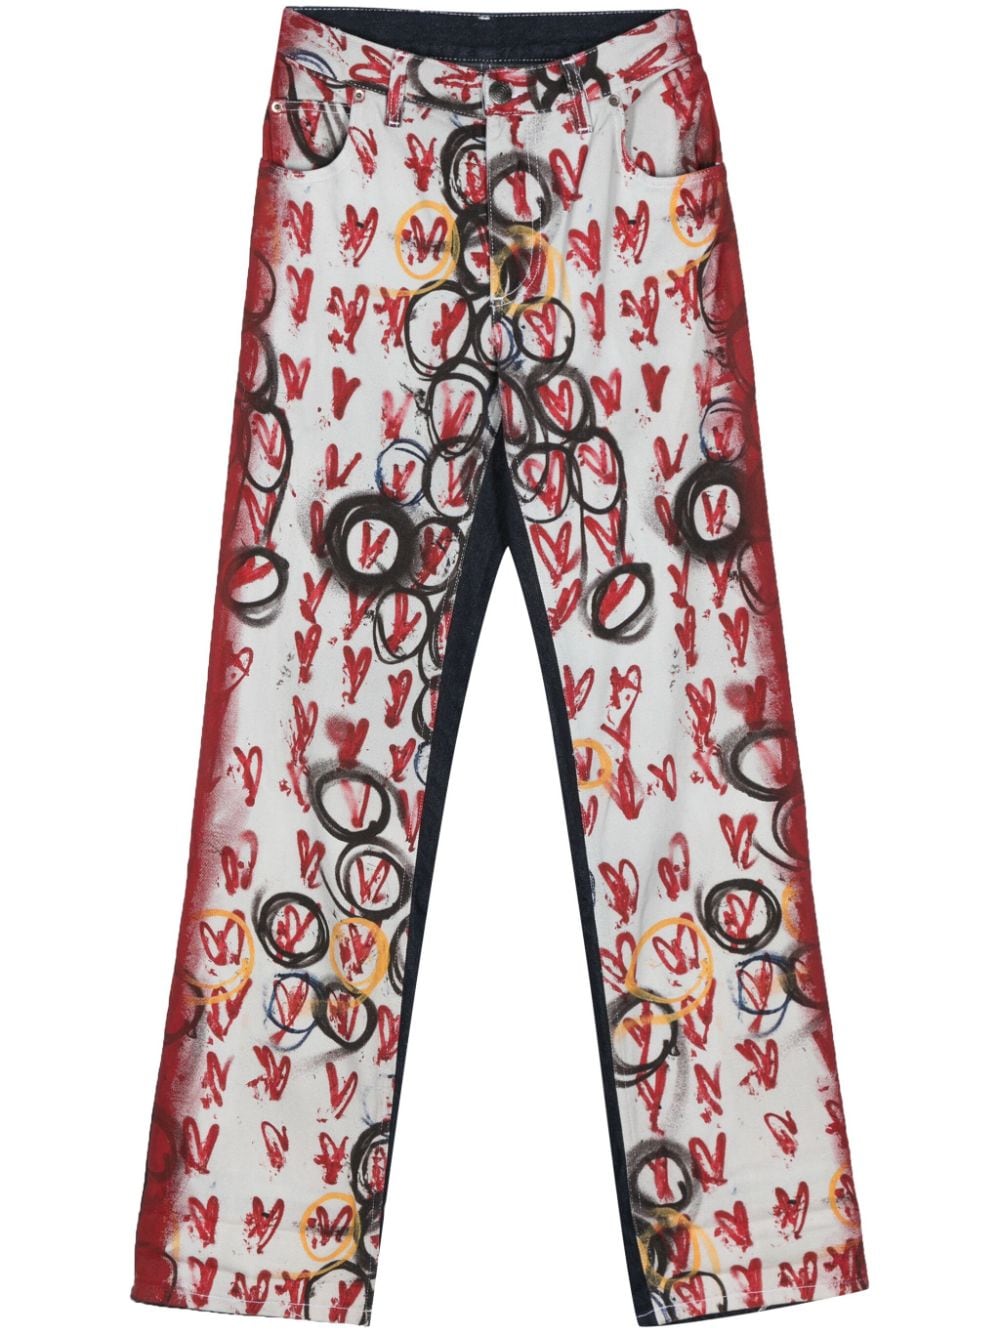 Charles Jeffrey Loverboy Exclusive Painted Art Cotton Jeans In Neutral